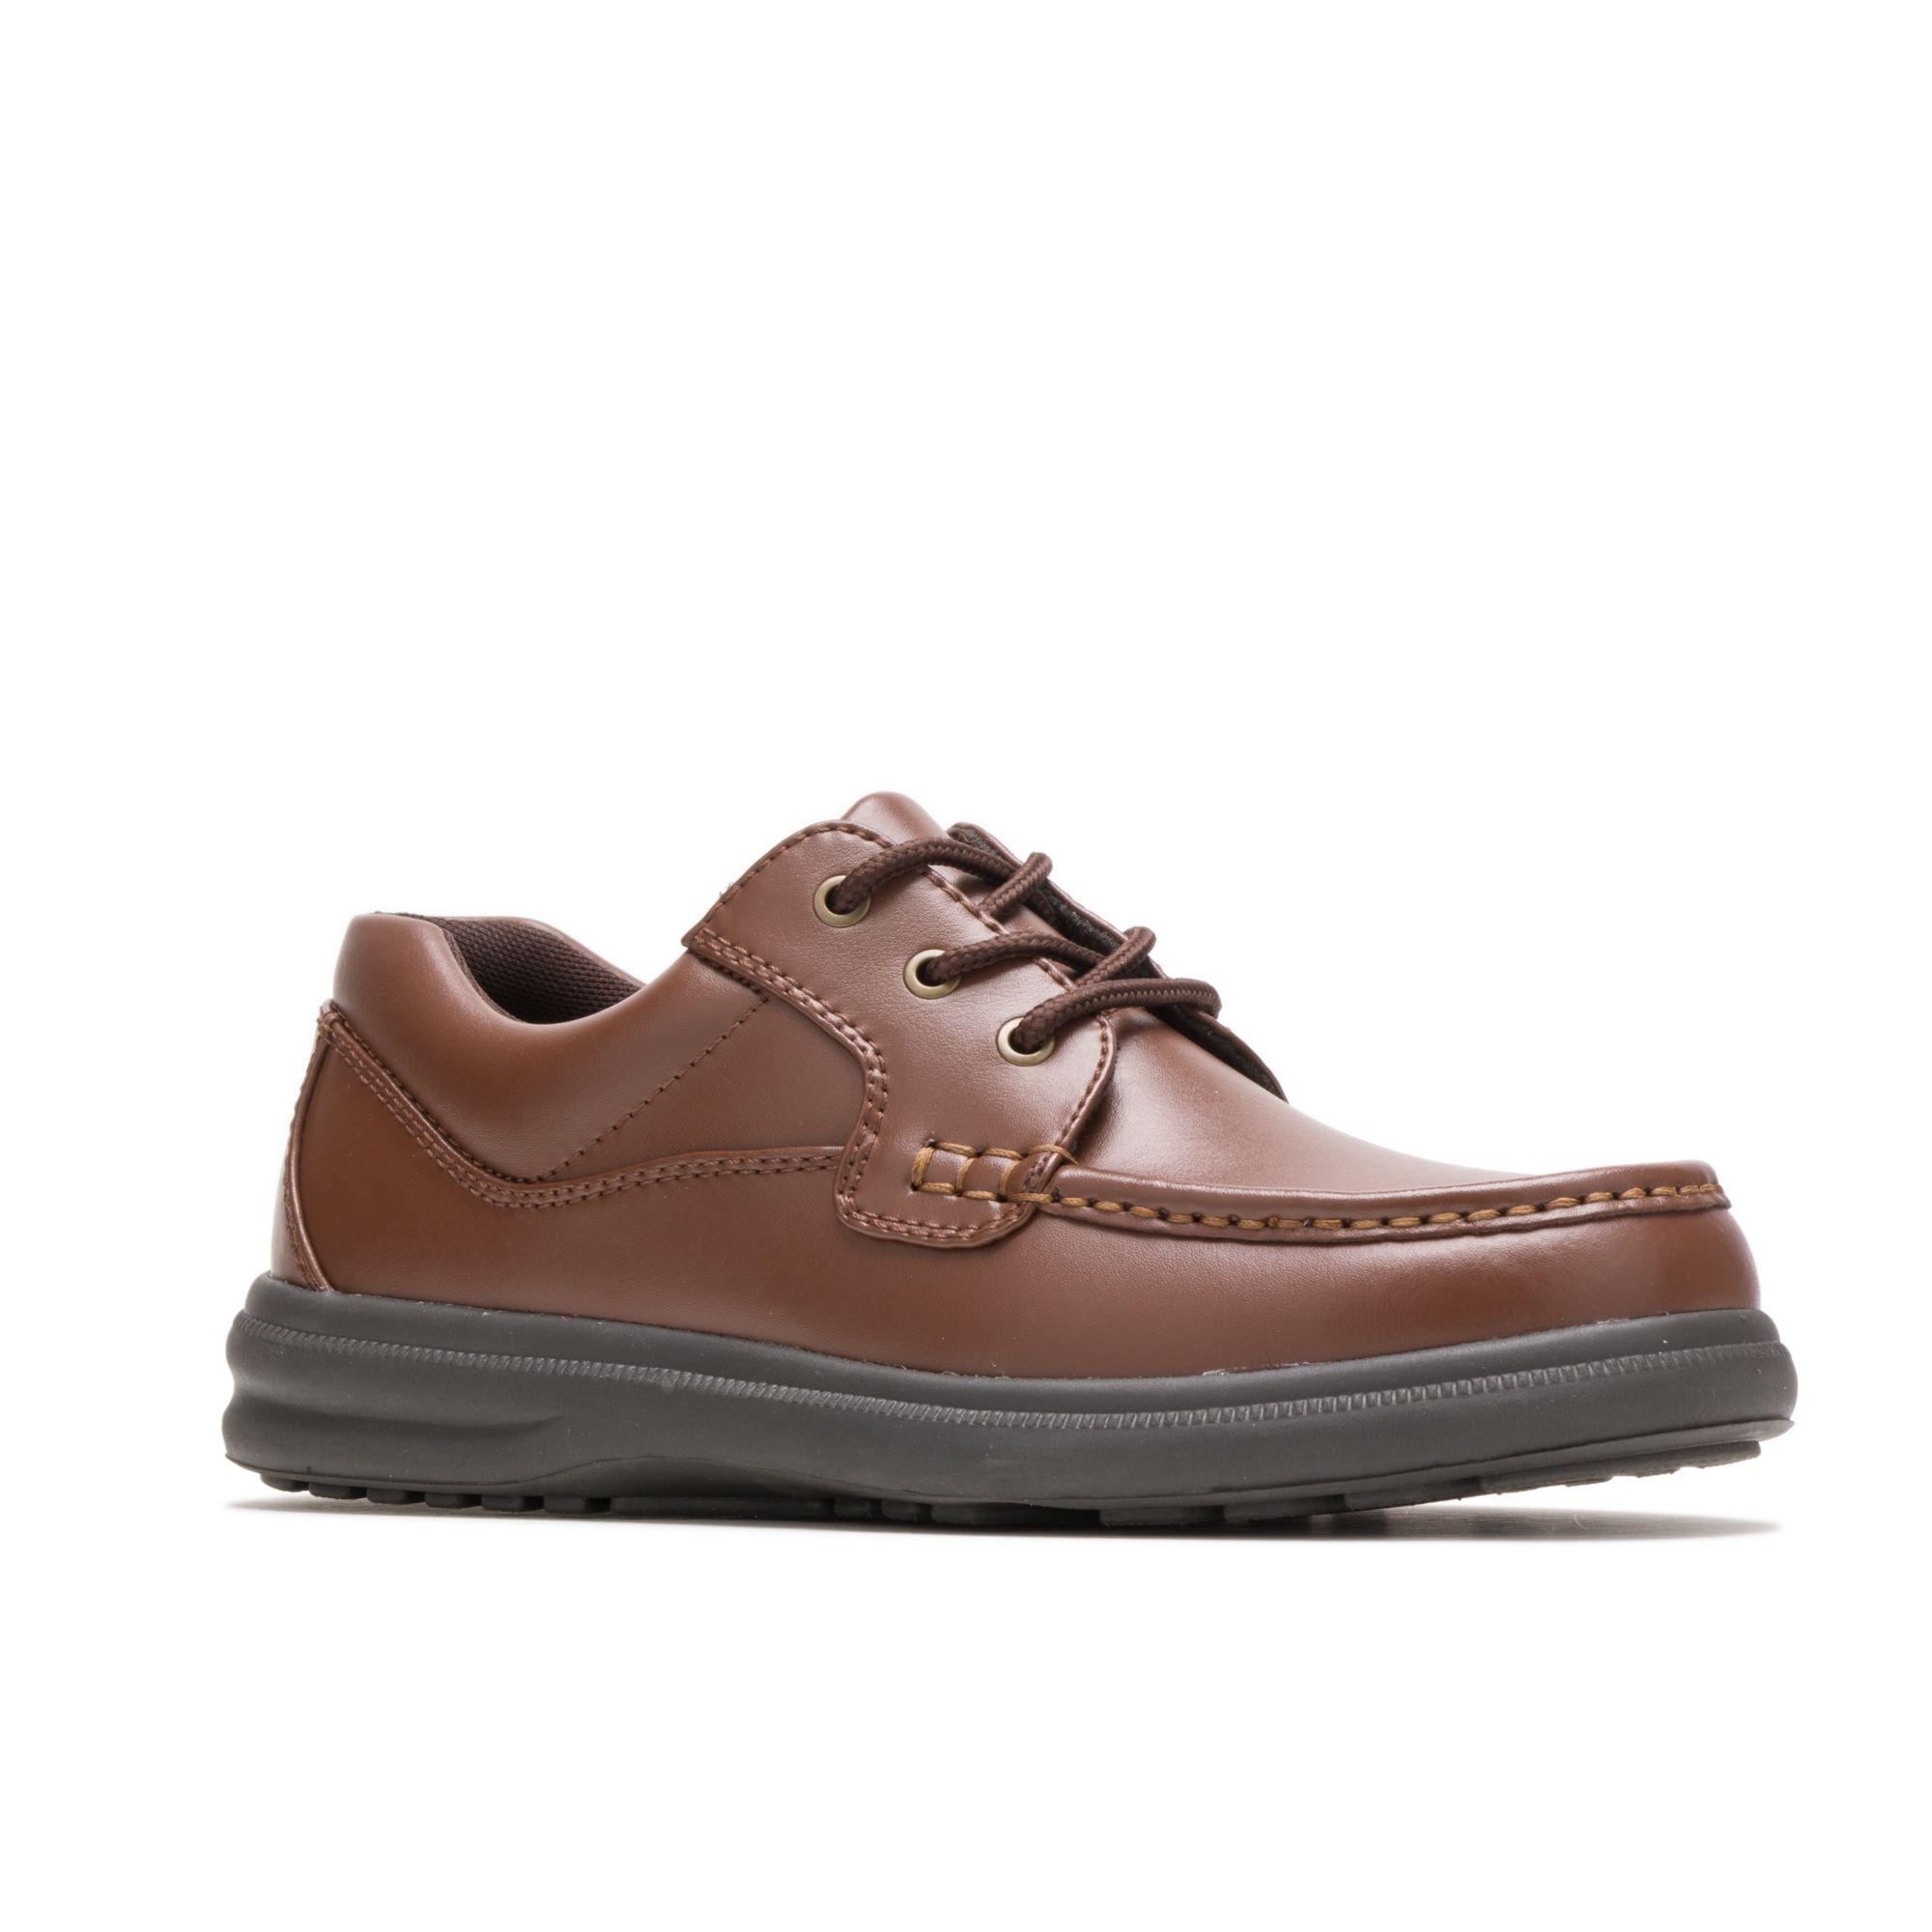 Hush Puppies Leather Gus Sneakers in Tan Leather (Brown) for Men - Lyst